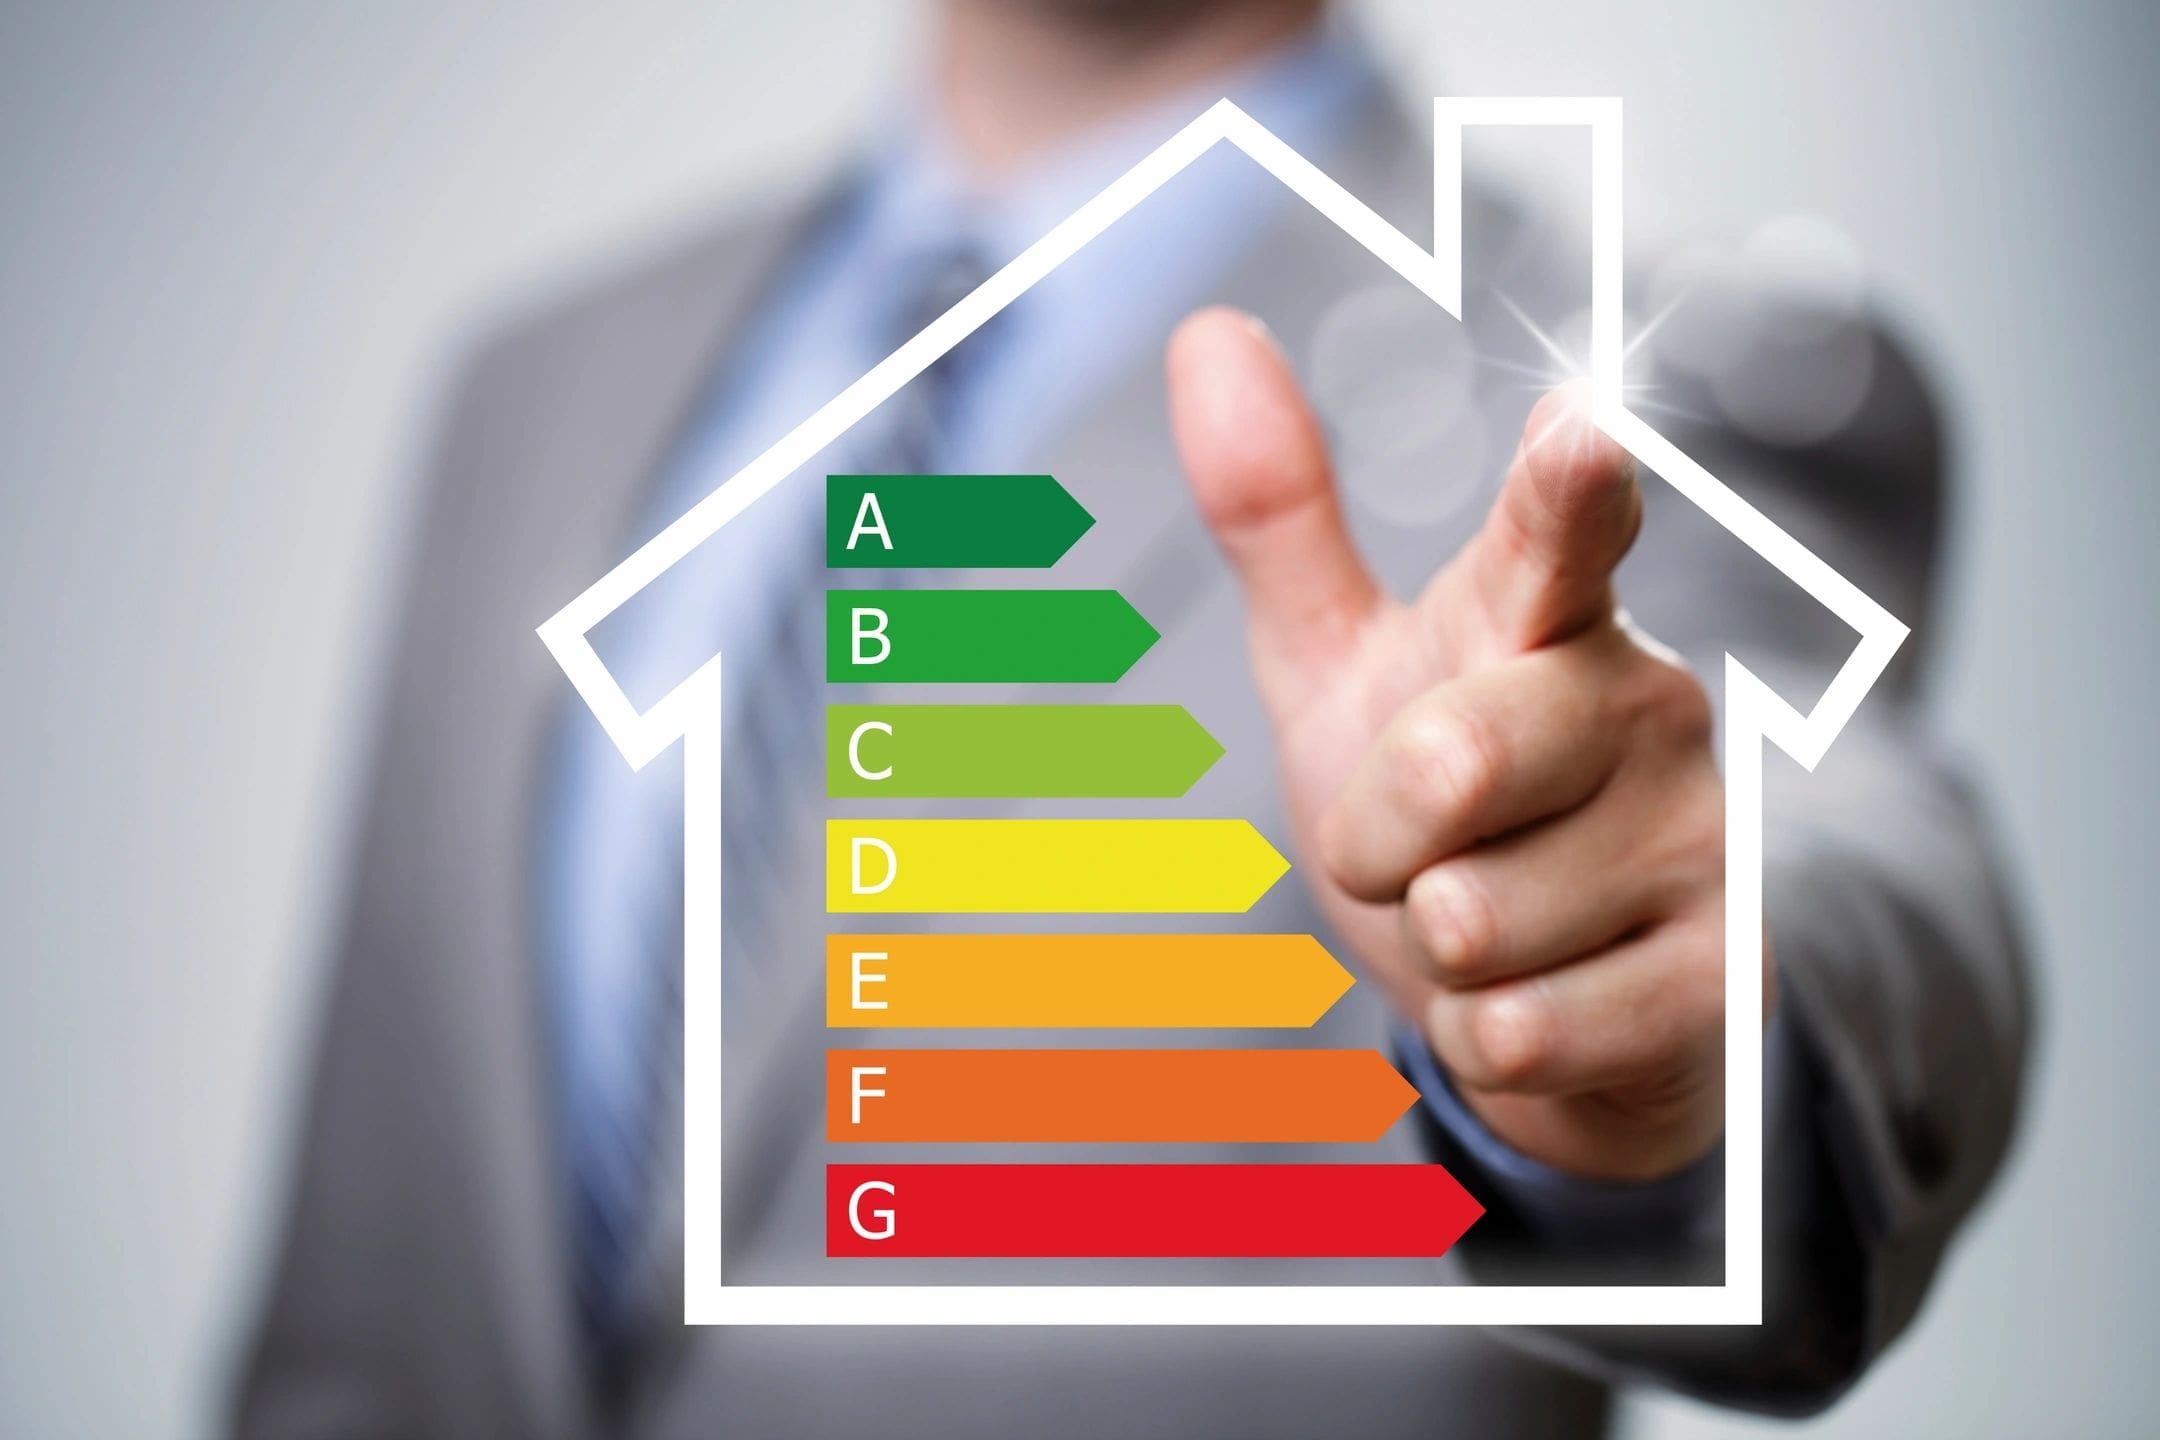 A color-coded rating system for building energy efficiency.